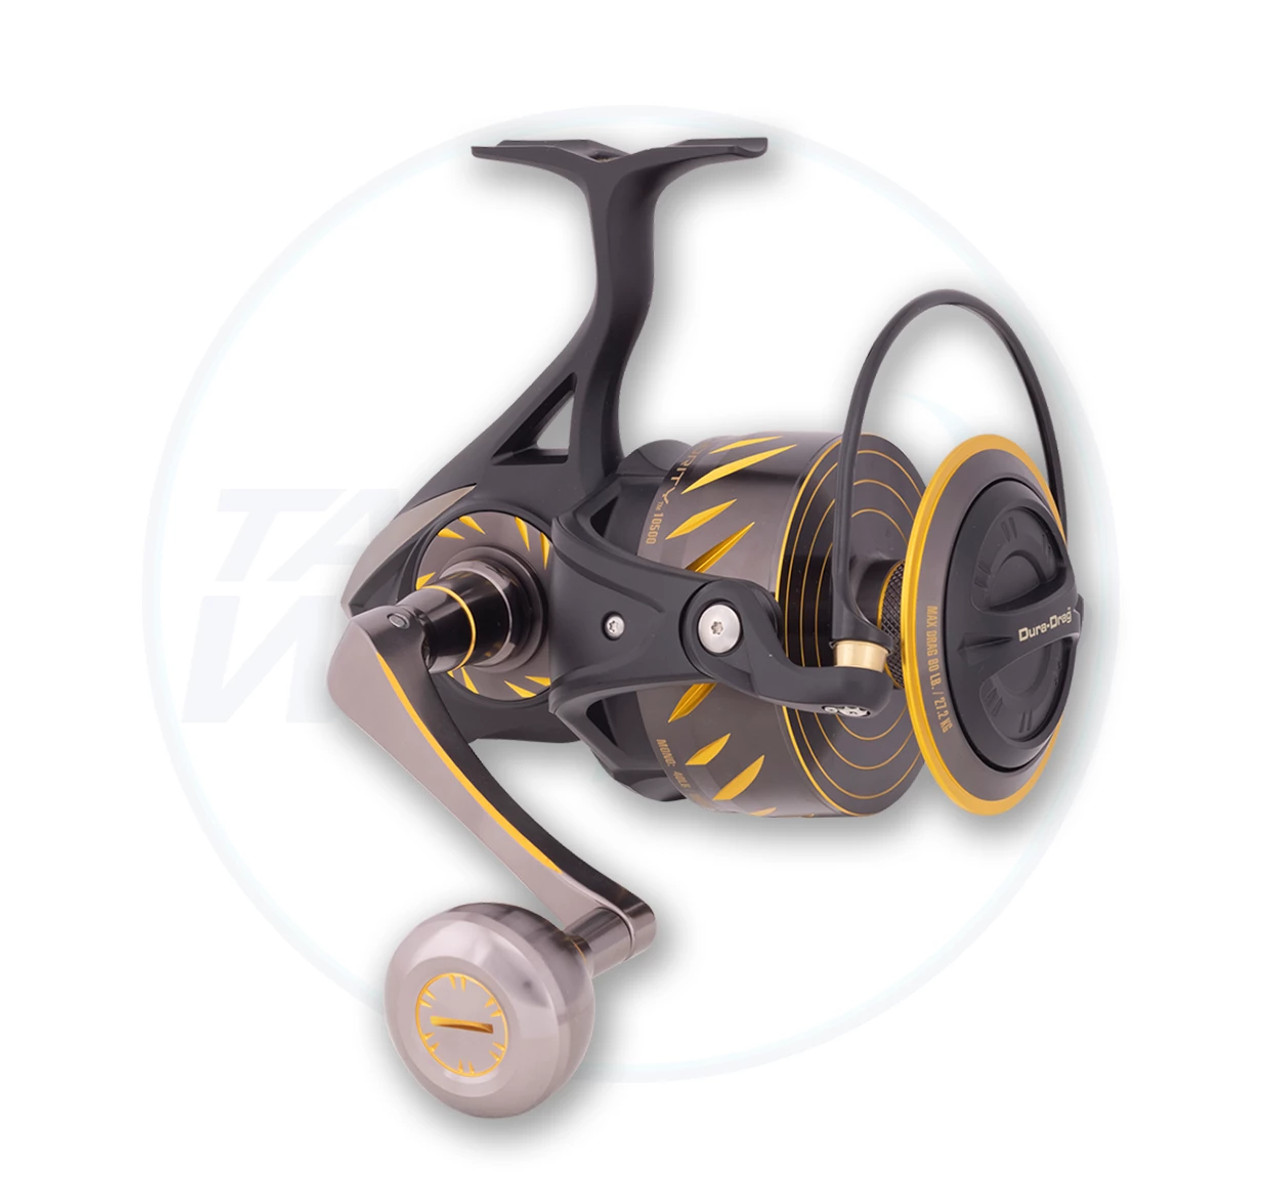 https://cdn11.bigcommerce.com/s-jmjroyqsgc/images/stencil/1280x1280/products/6148/21259/penn_authority_spinning_reel_-_product_image__66221.1673398984.jpg?c=2